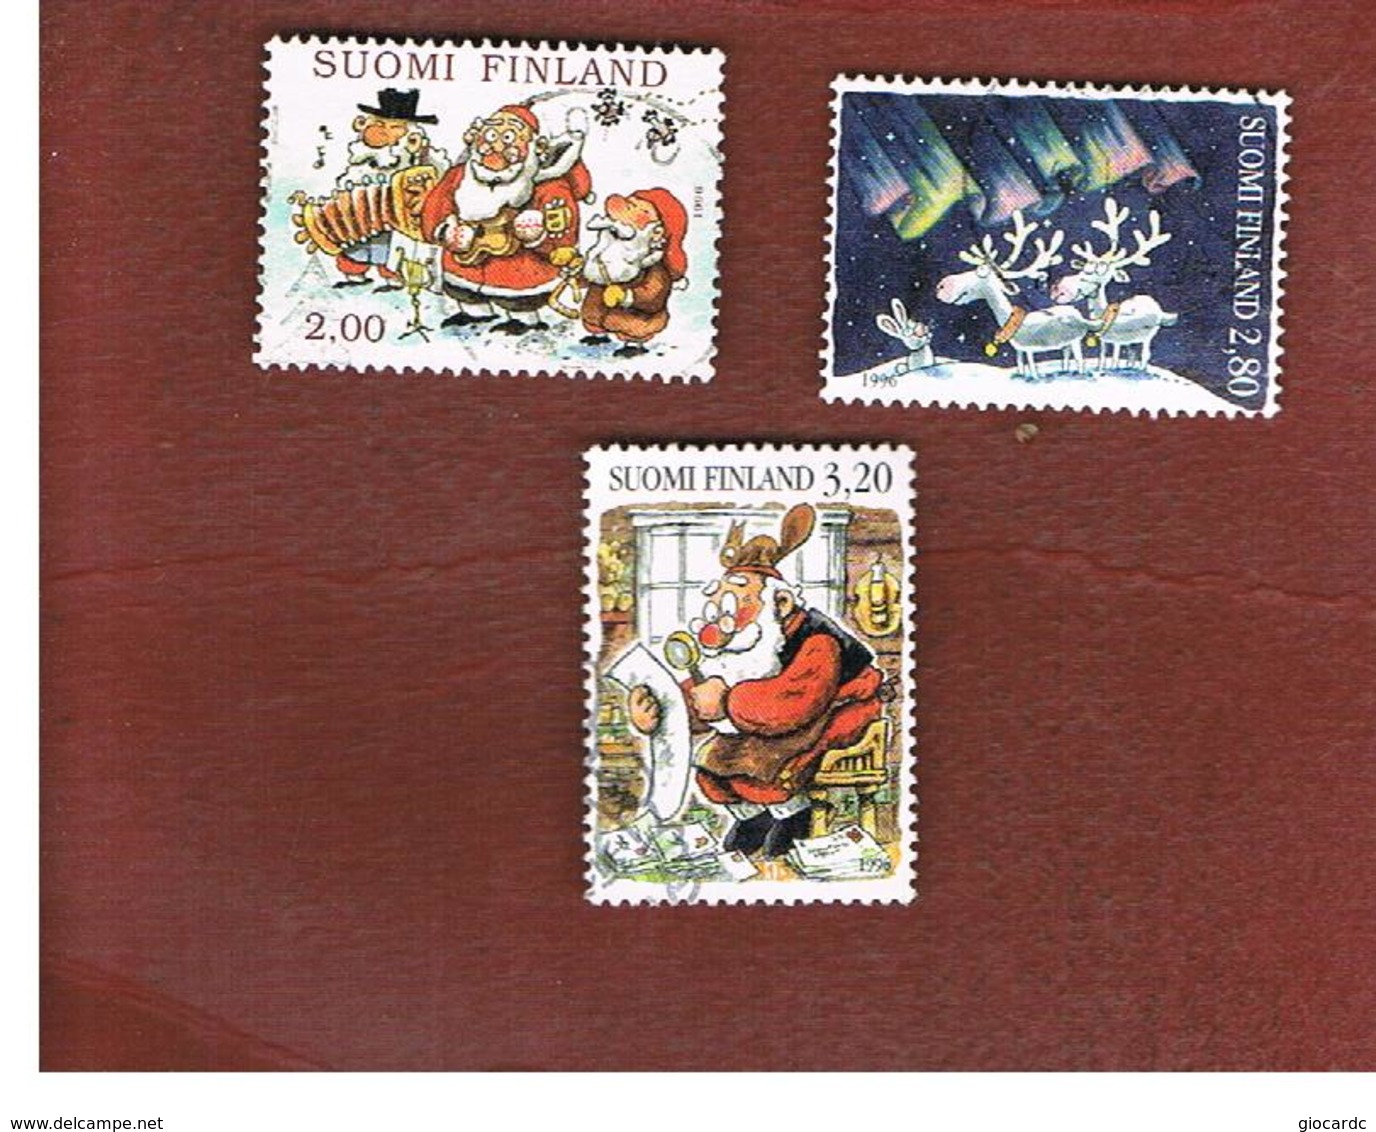 FINLANDIA (FINLAND) -  SG  1453.1455   -    1996  CHRISTMAS (COMPLET SET OF 3)        -         USED ° - Gebraucht